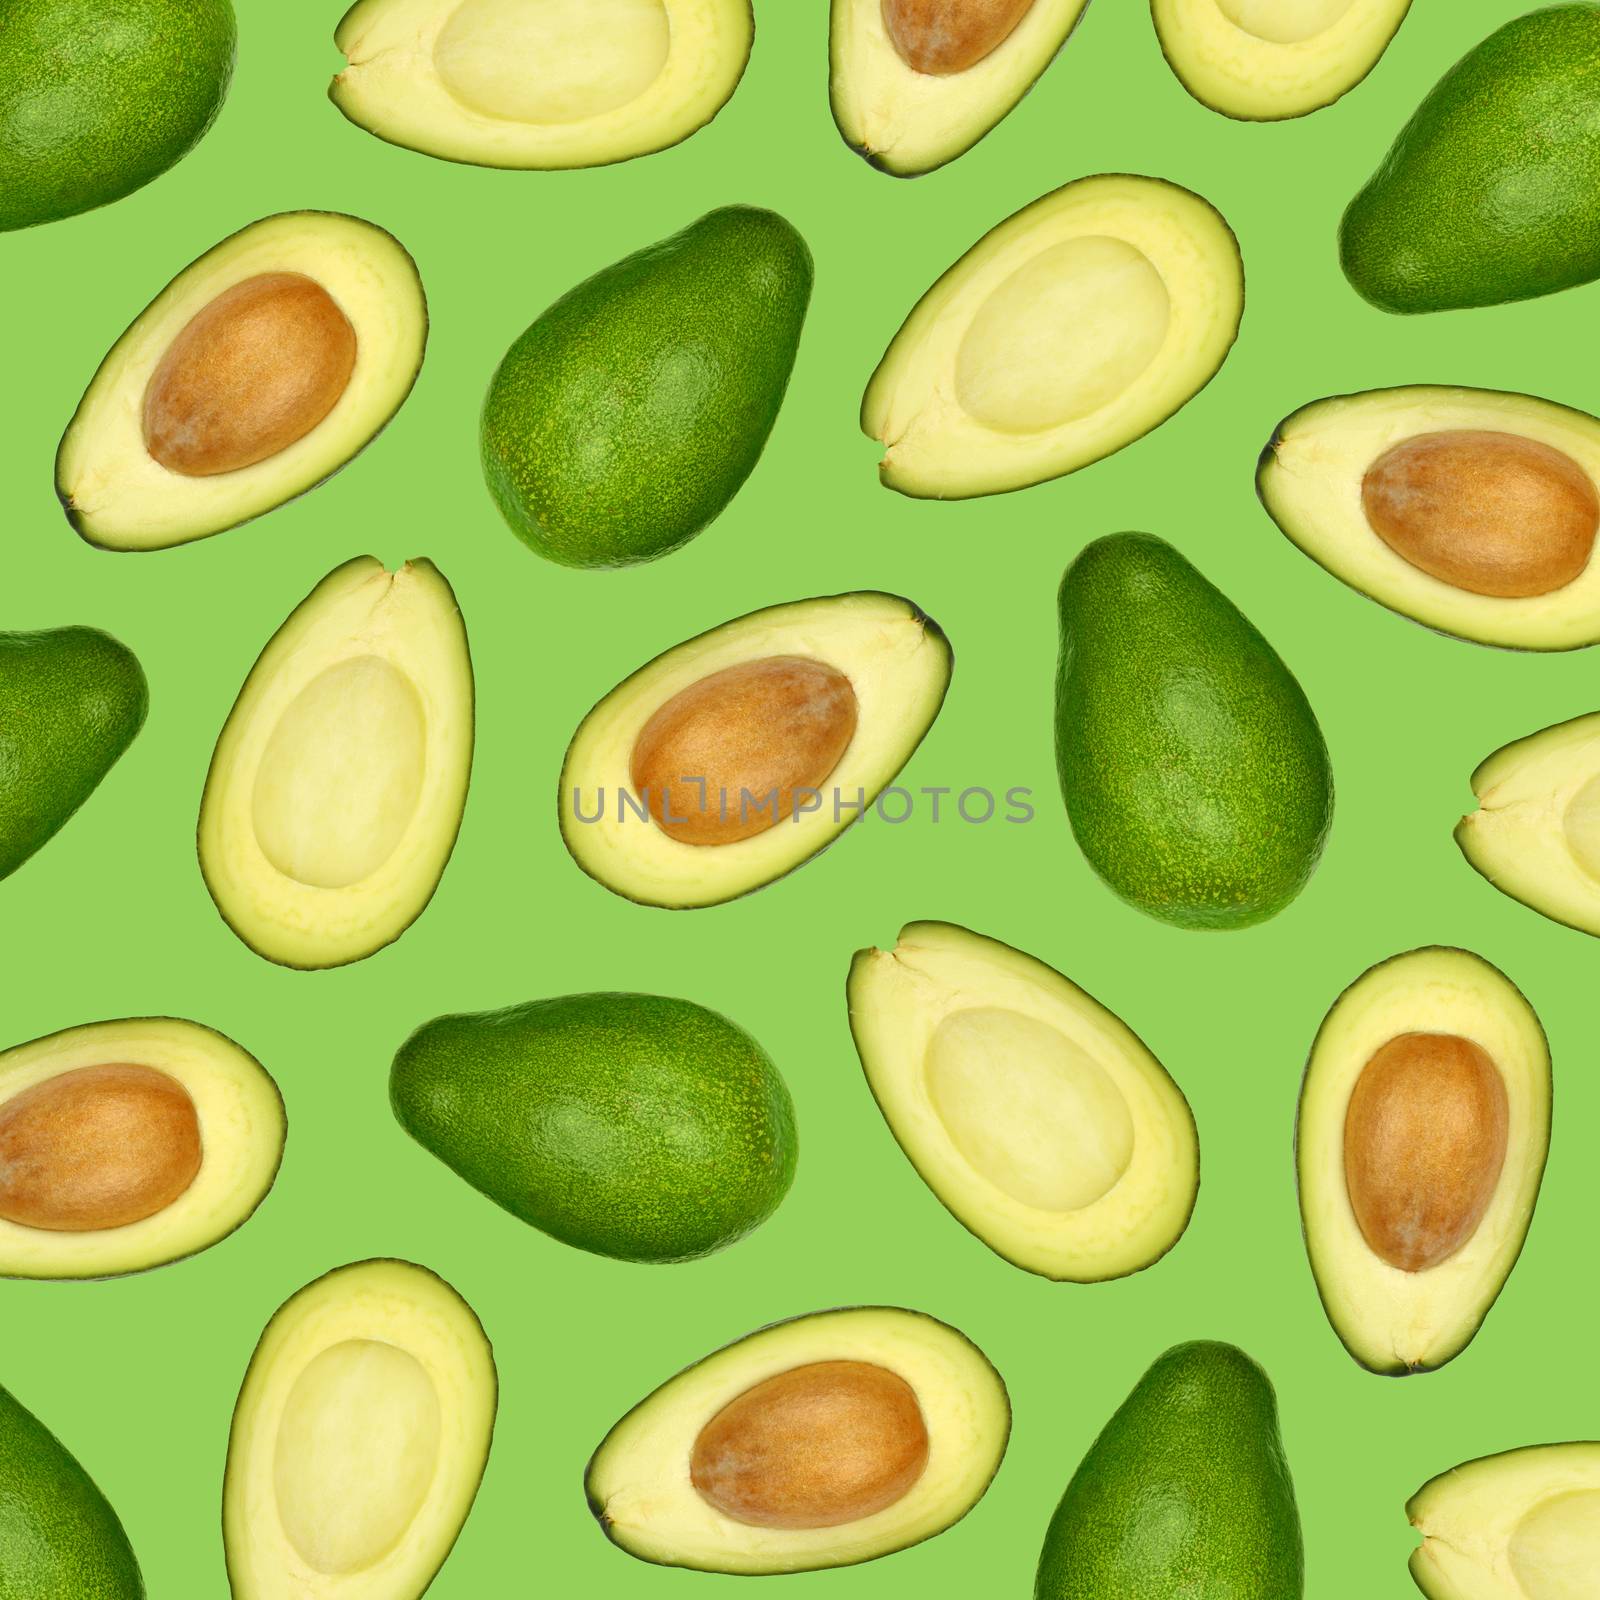 Pattern of fresh halved cut and whole avocados over green background